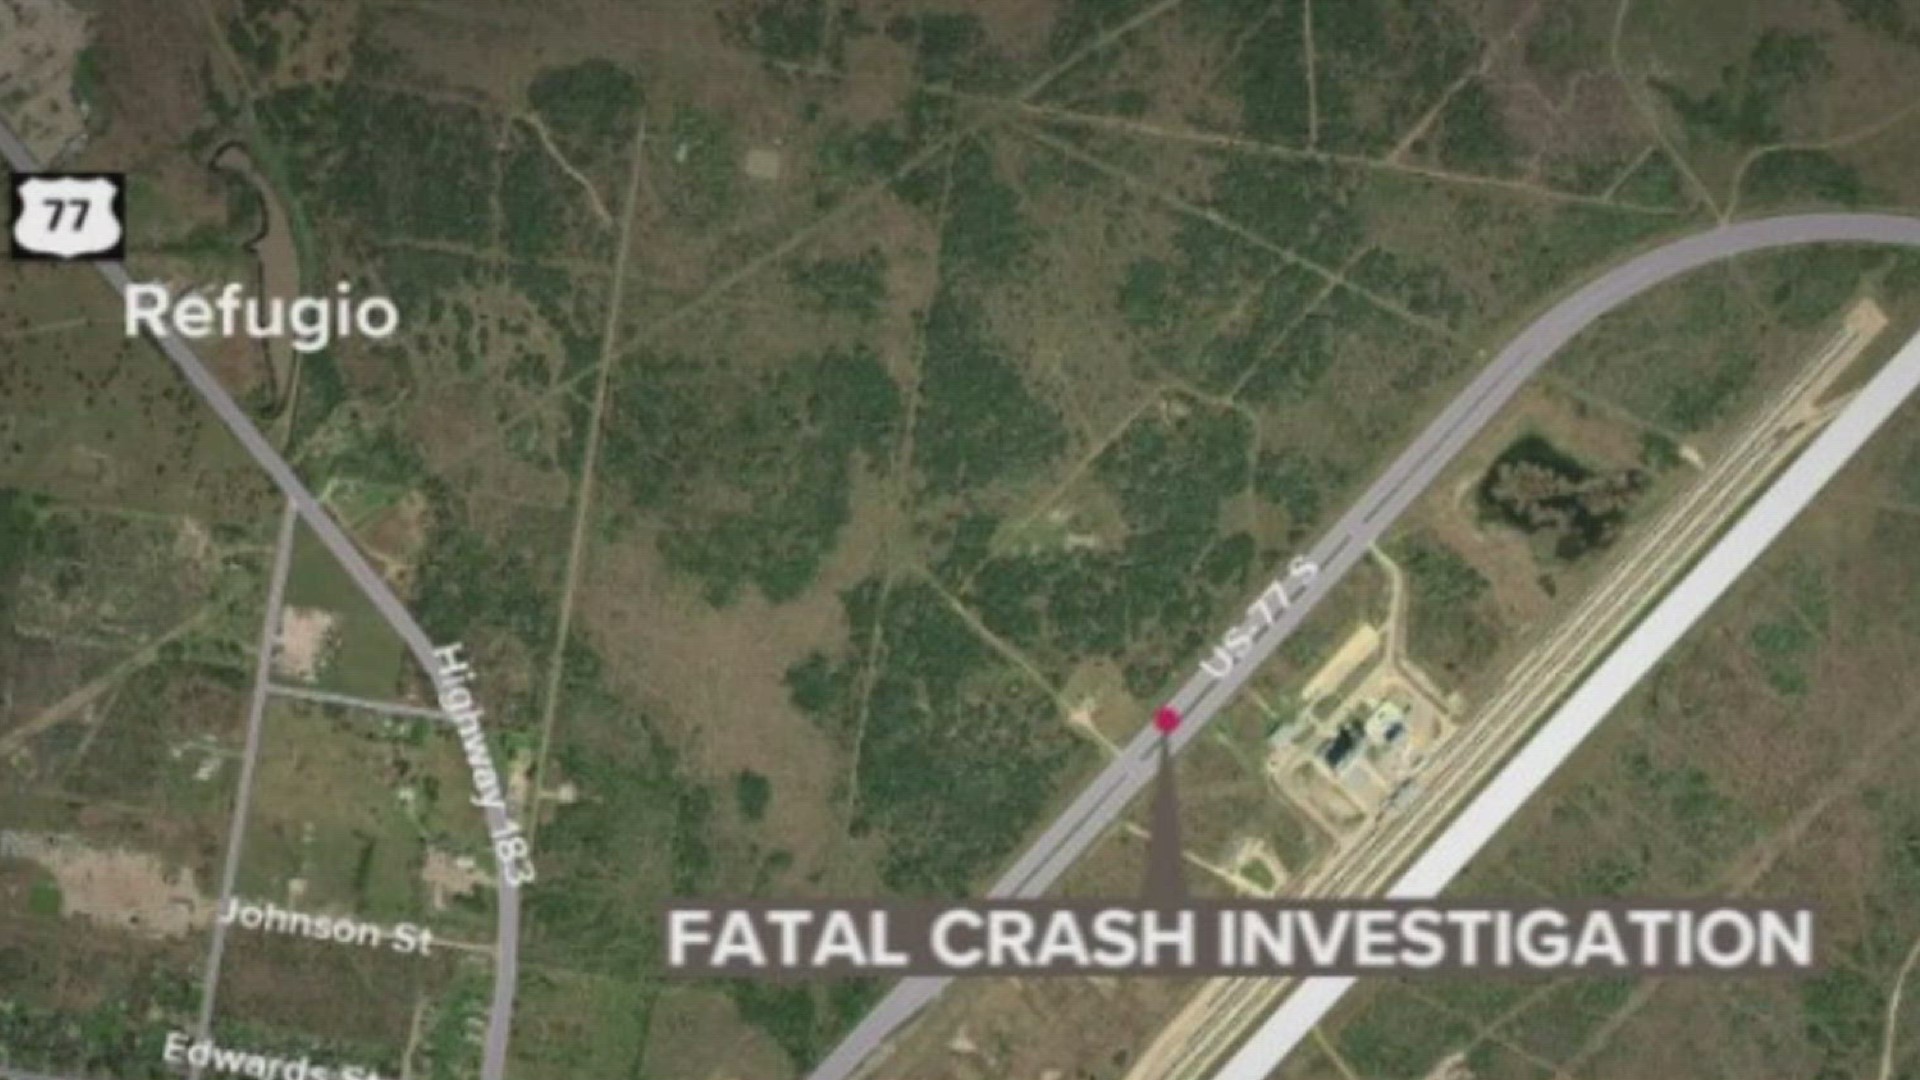 DPS explained that the 2-vehicle crash happened at 5 a.m. when both trucks were heading South on US 77.